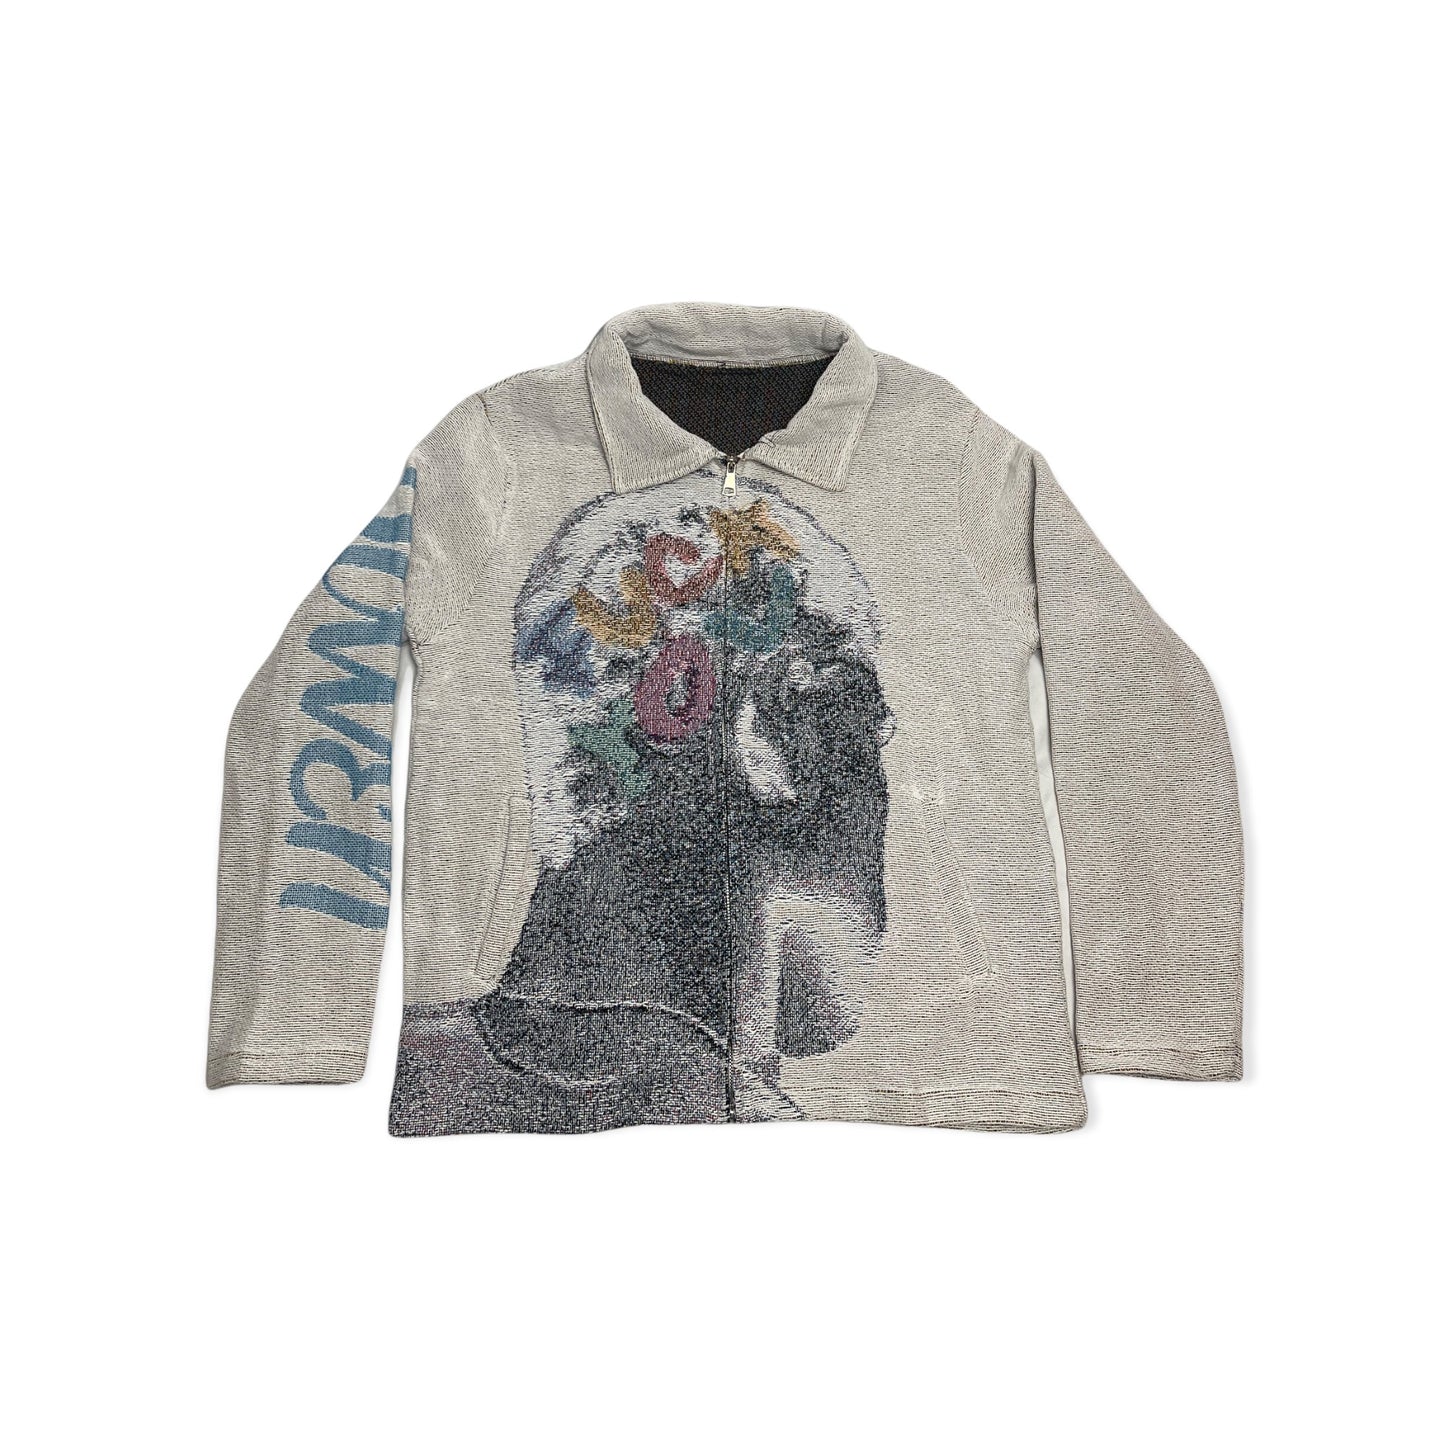 "F YOU" TAPESTRY JACKET